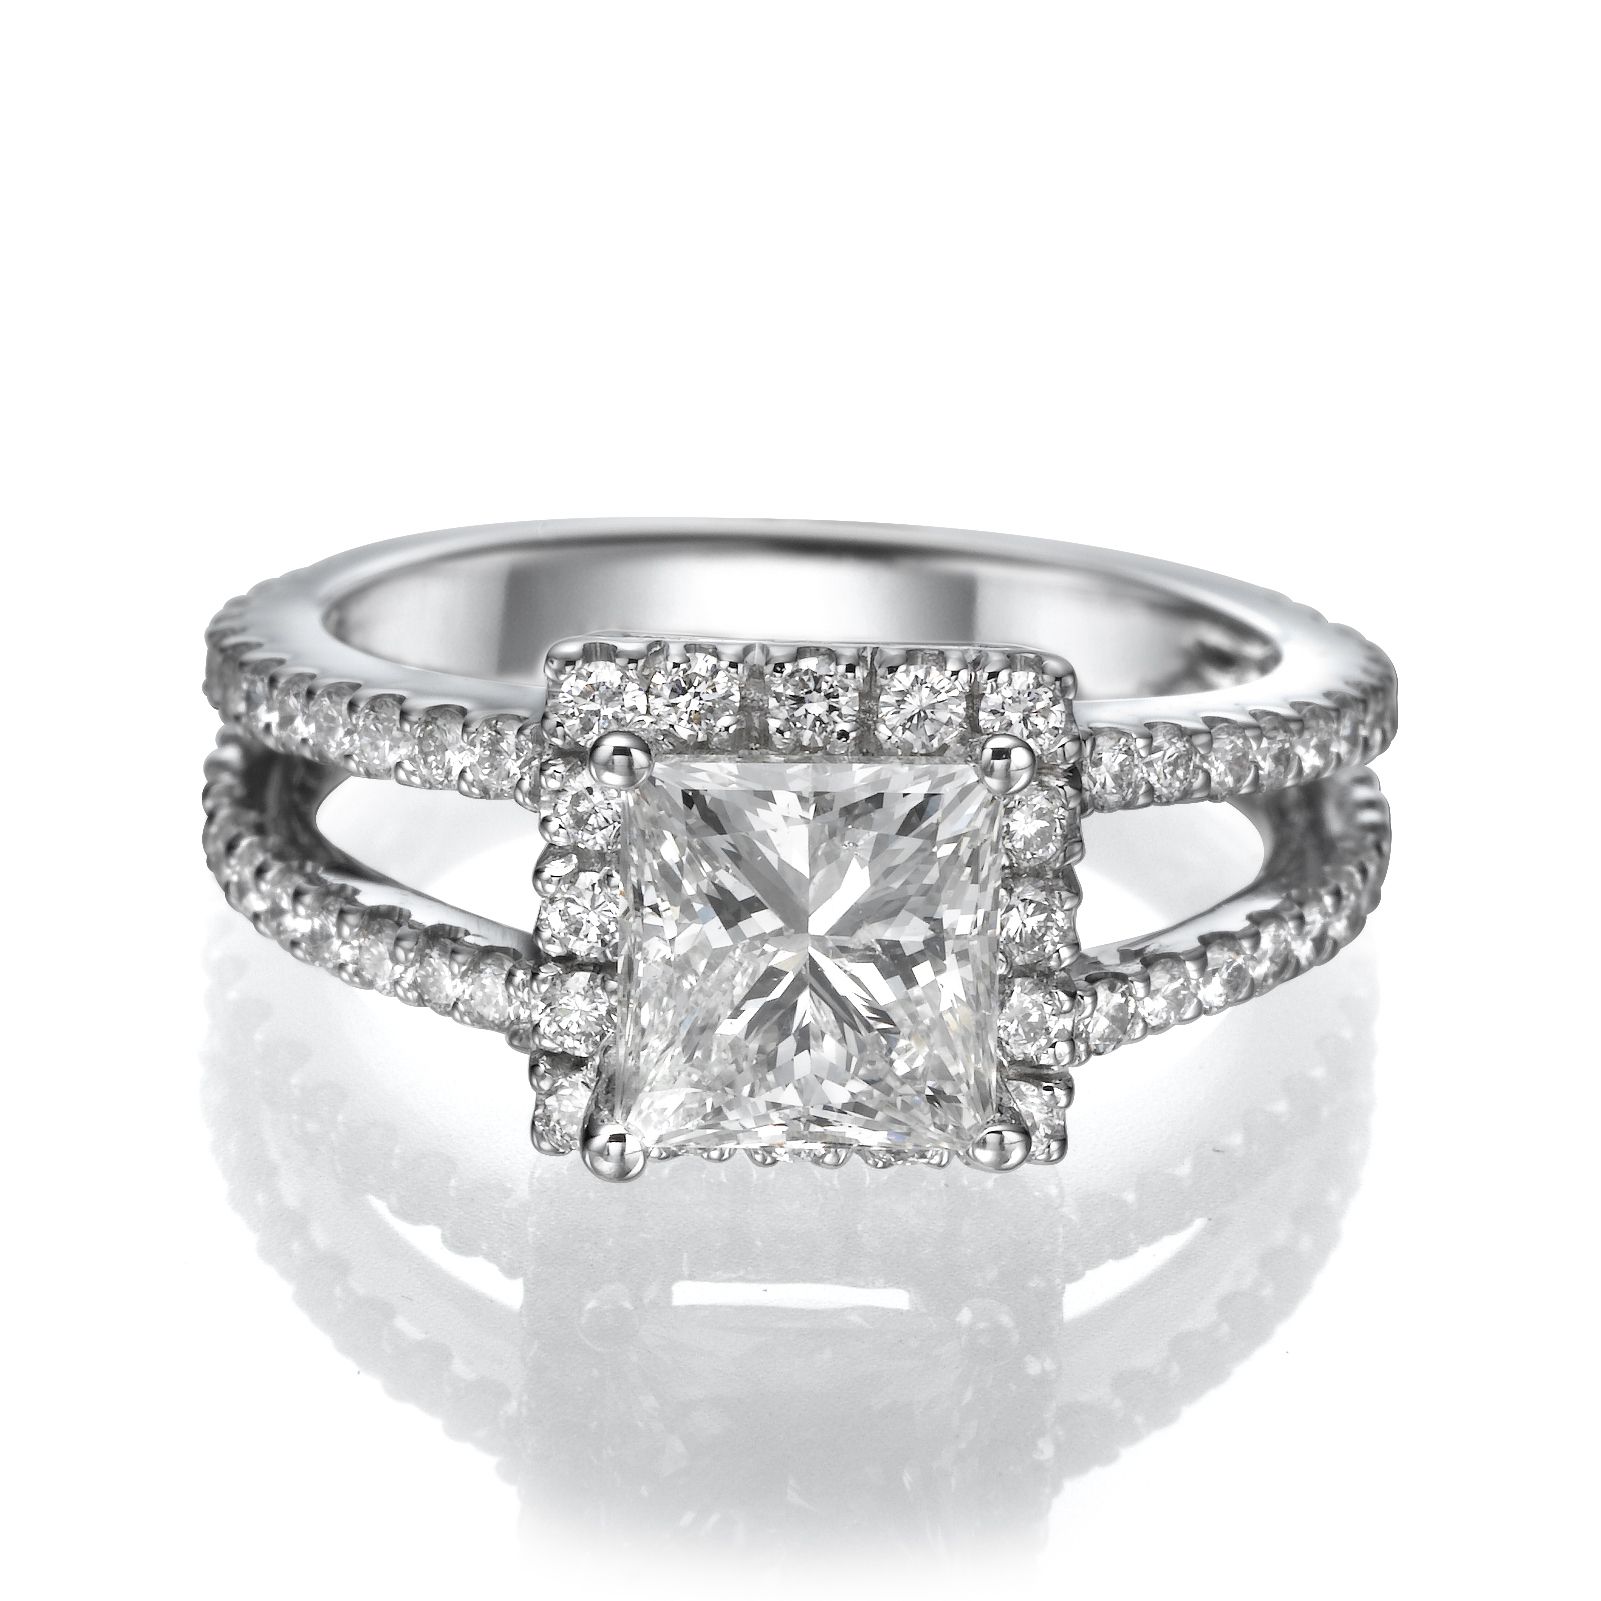 Details About Diamond Ring Halo Vs1 Princess Cut  (View 20 of 25)